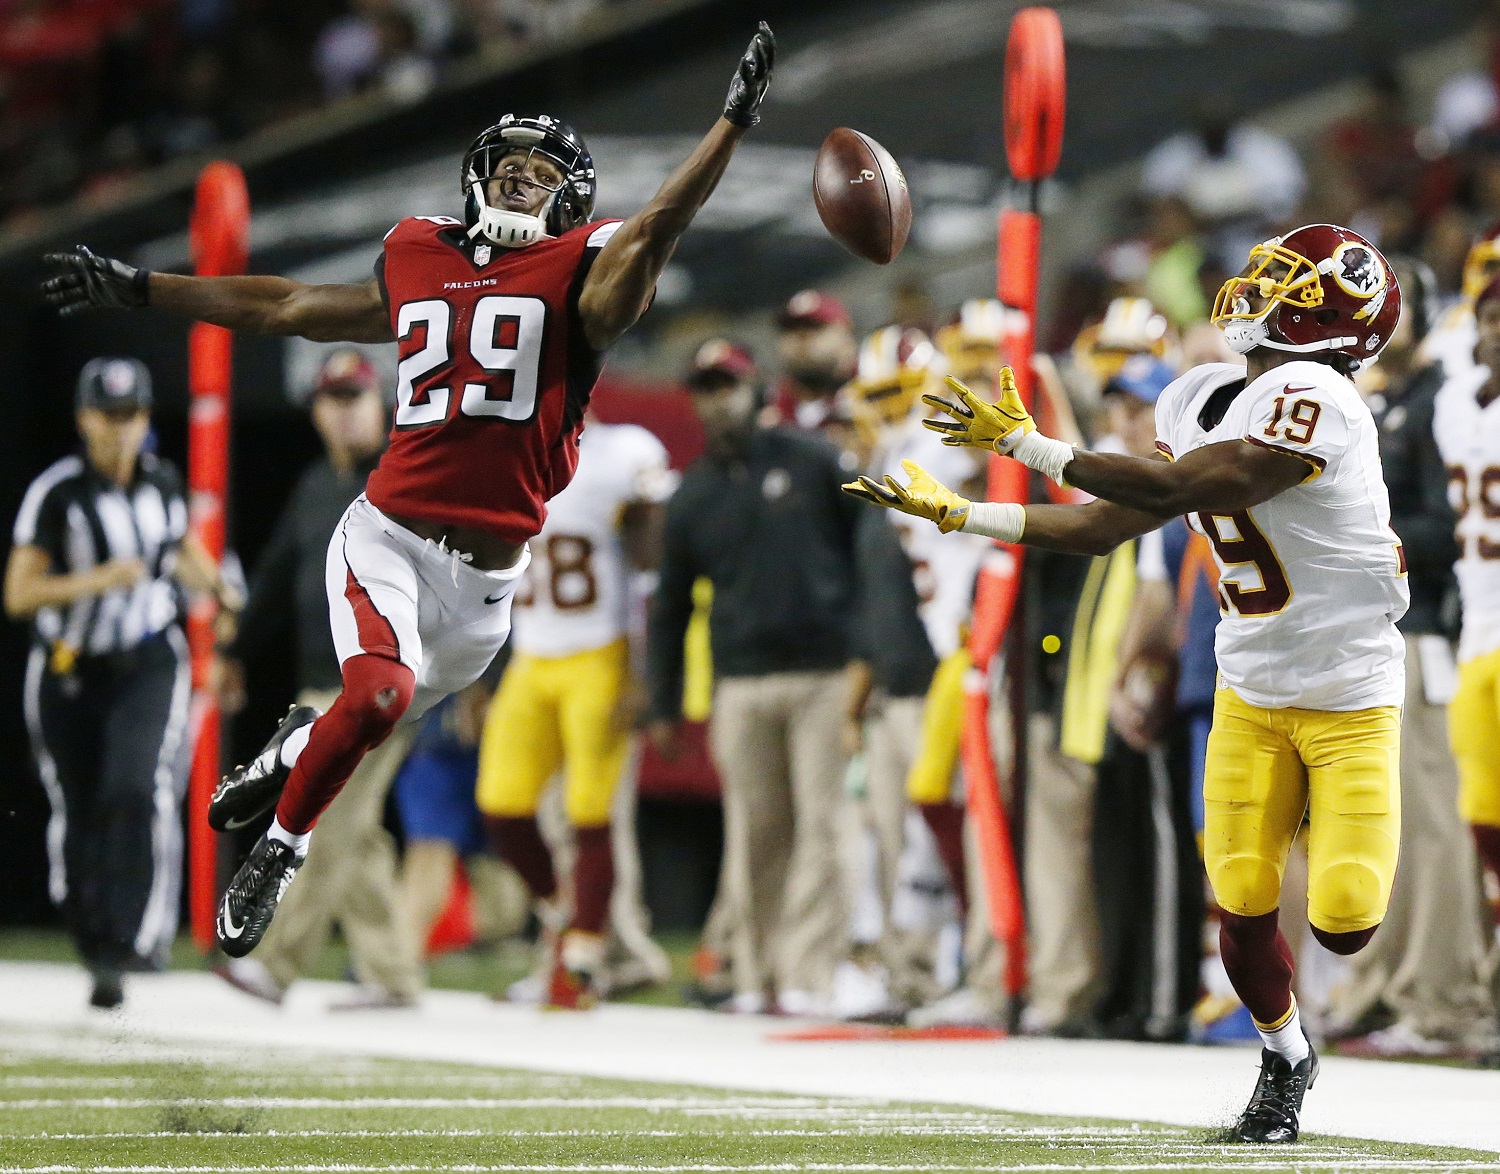 Atlanta Falcons cornerback C.J. Goodwin (29) breaks up a pass intended for Washington Redskins wide receiver Rashad Ross (19) during the first half of a preseason NFL football game, Thursday, Aug. 11, 2016, in Atlanta. (AP Photo/Brynn Anderson)